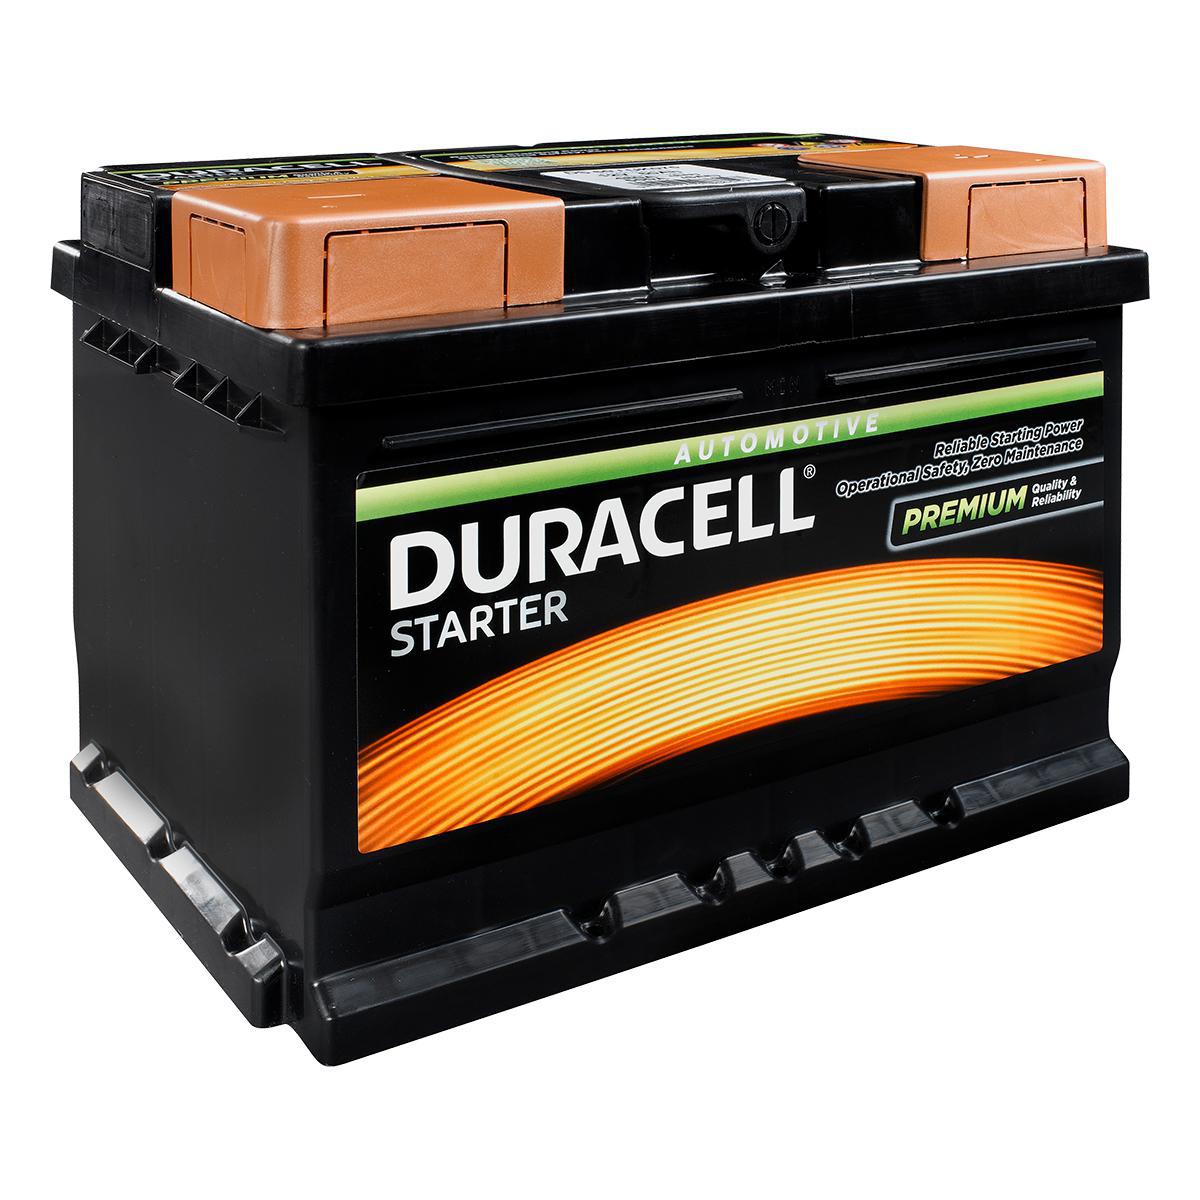 duracell-063-ds44-starter-car-battery-www-batterycharged-co-uk